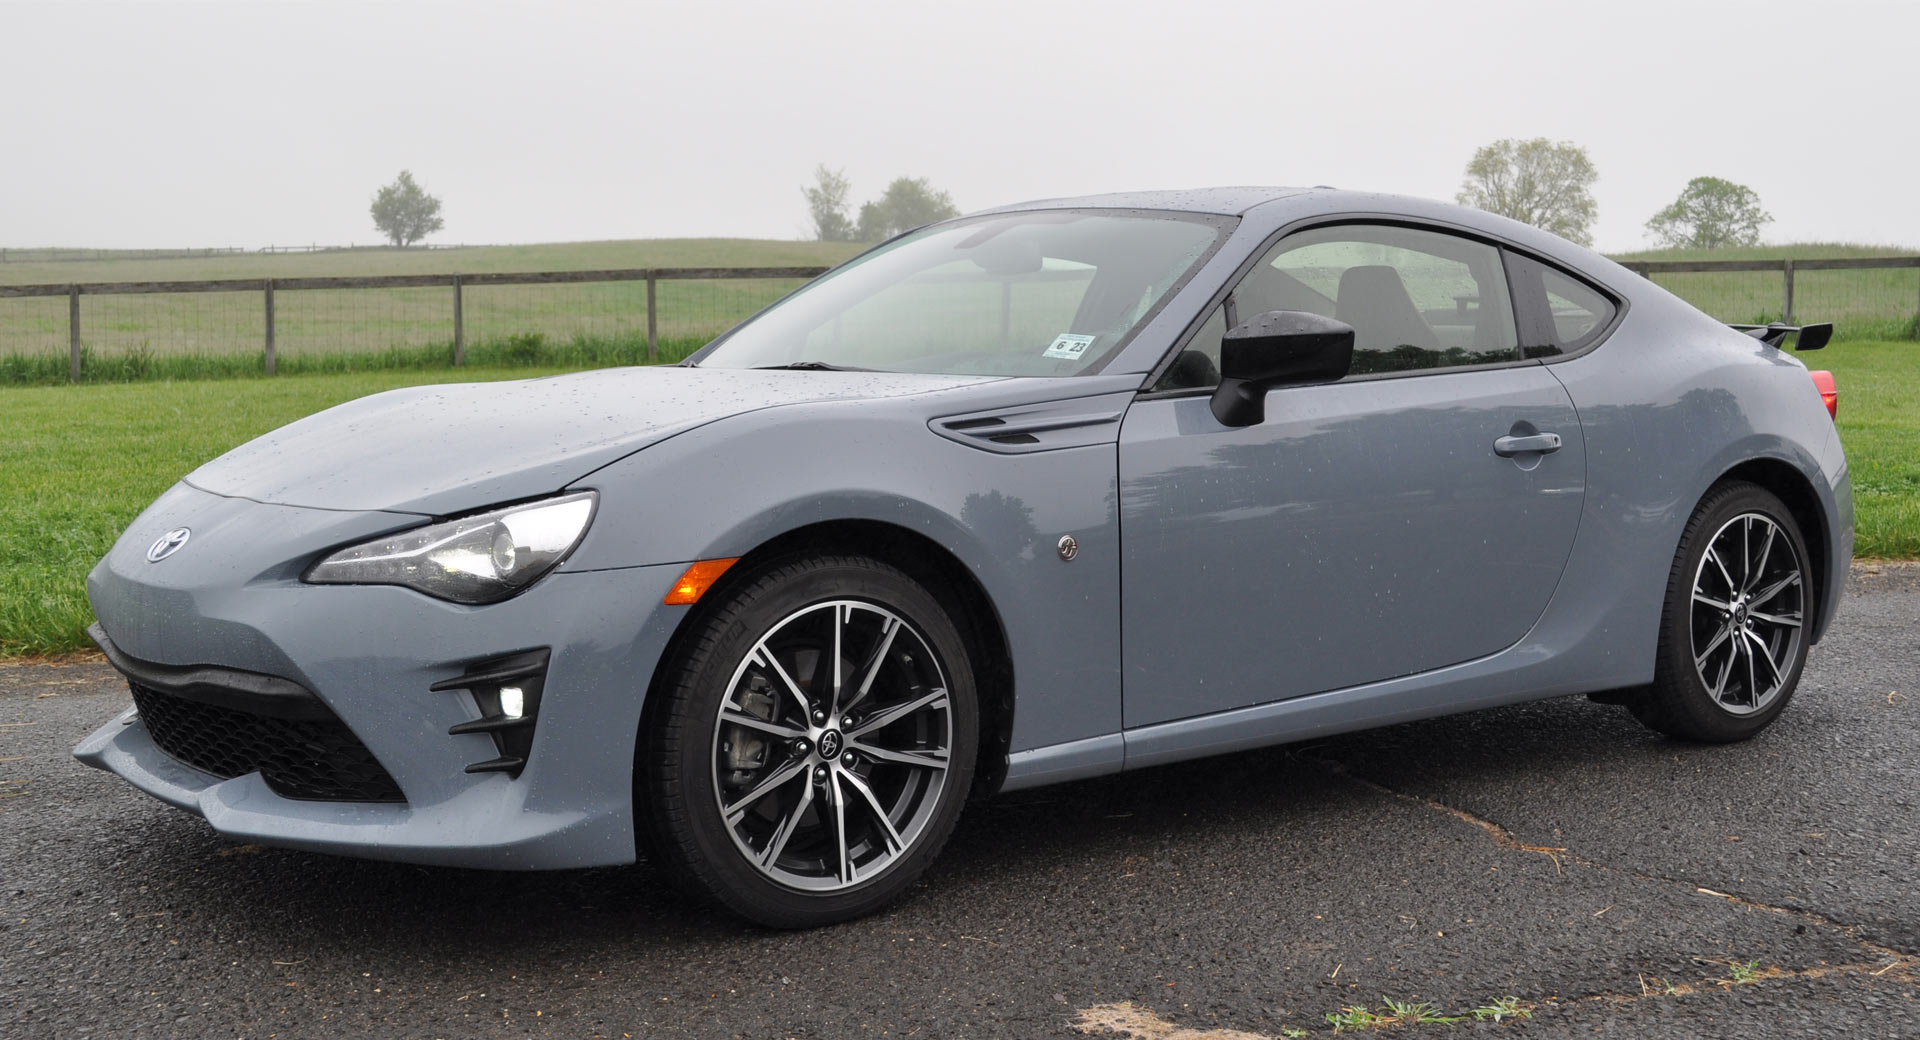 2020 Toyota 86 Review: The Ultimate Driver's Car If You Want That